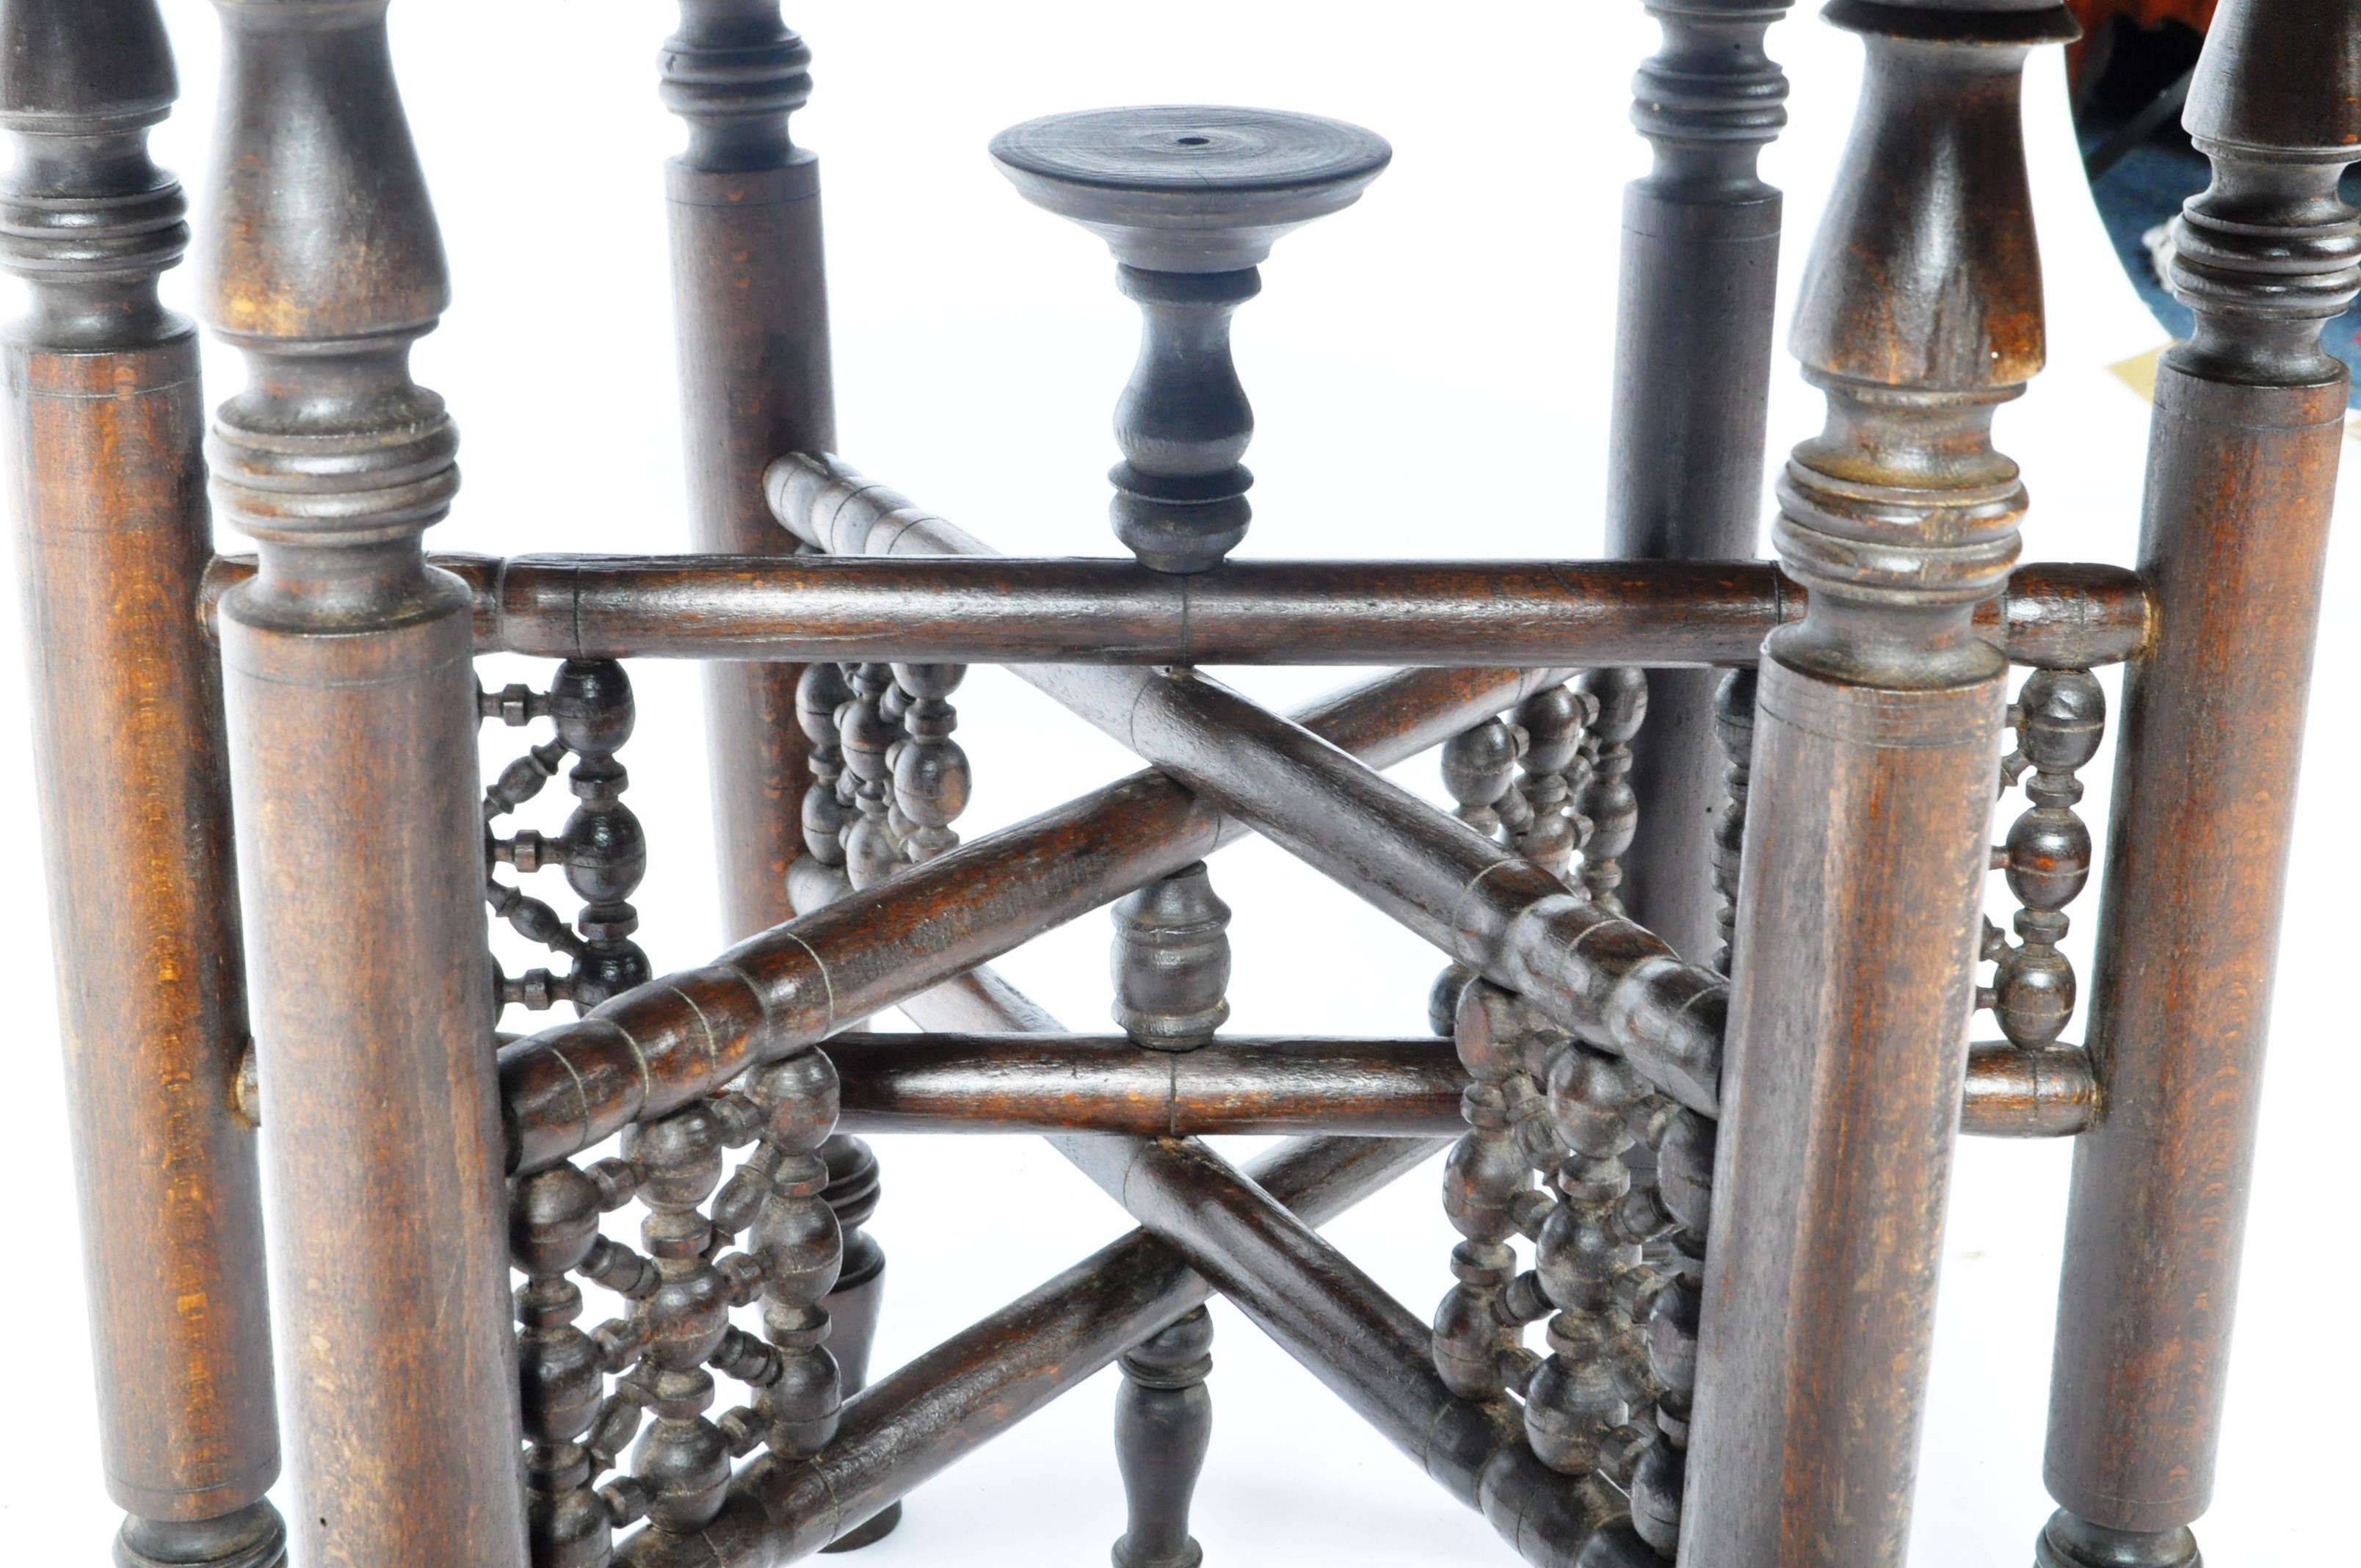 LATE 19TH CENTURY ISLAMIC BENARES BRASS TOPPED TABLE - Image 7 of 9